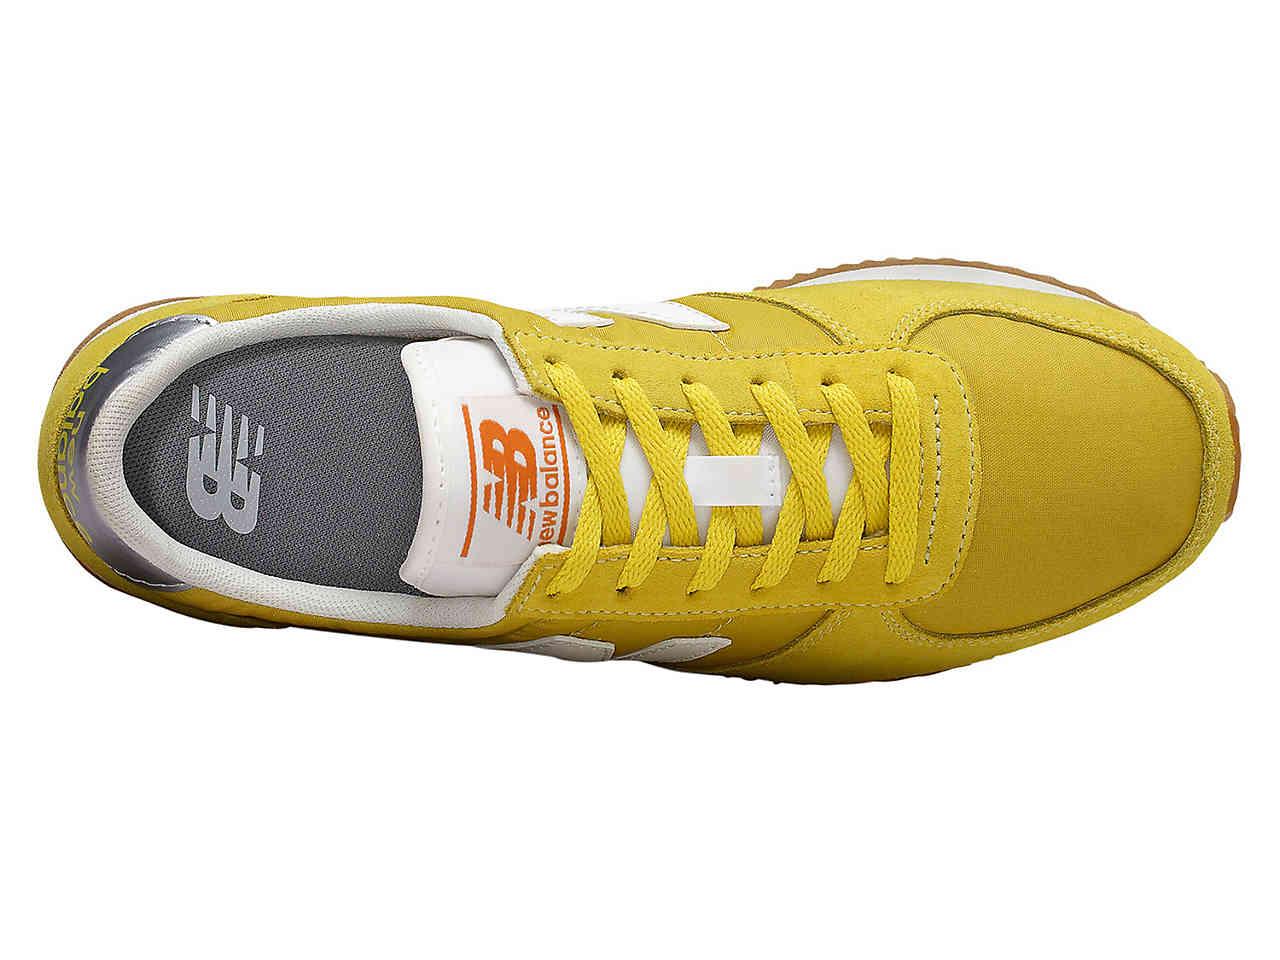 New Balance Suede 220 Sneaker in Mustard Yellow/White (Yellow) | Lyst